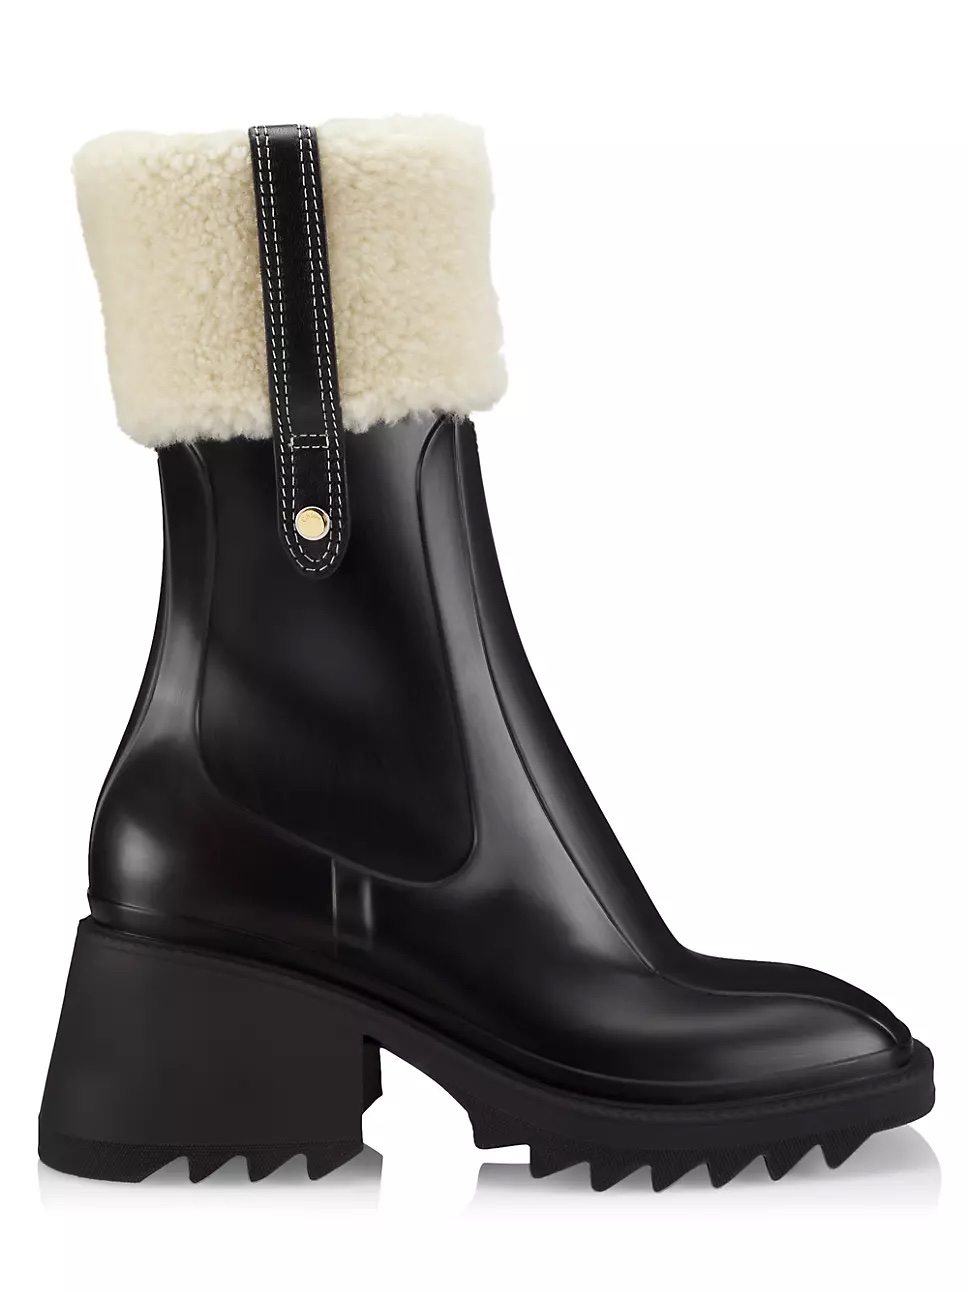 Chloe Betty Shearling-Lined Rubber Boots